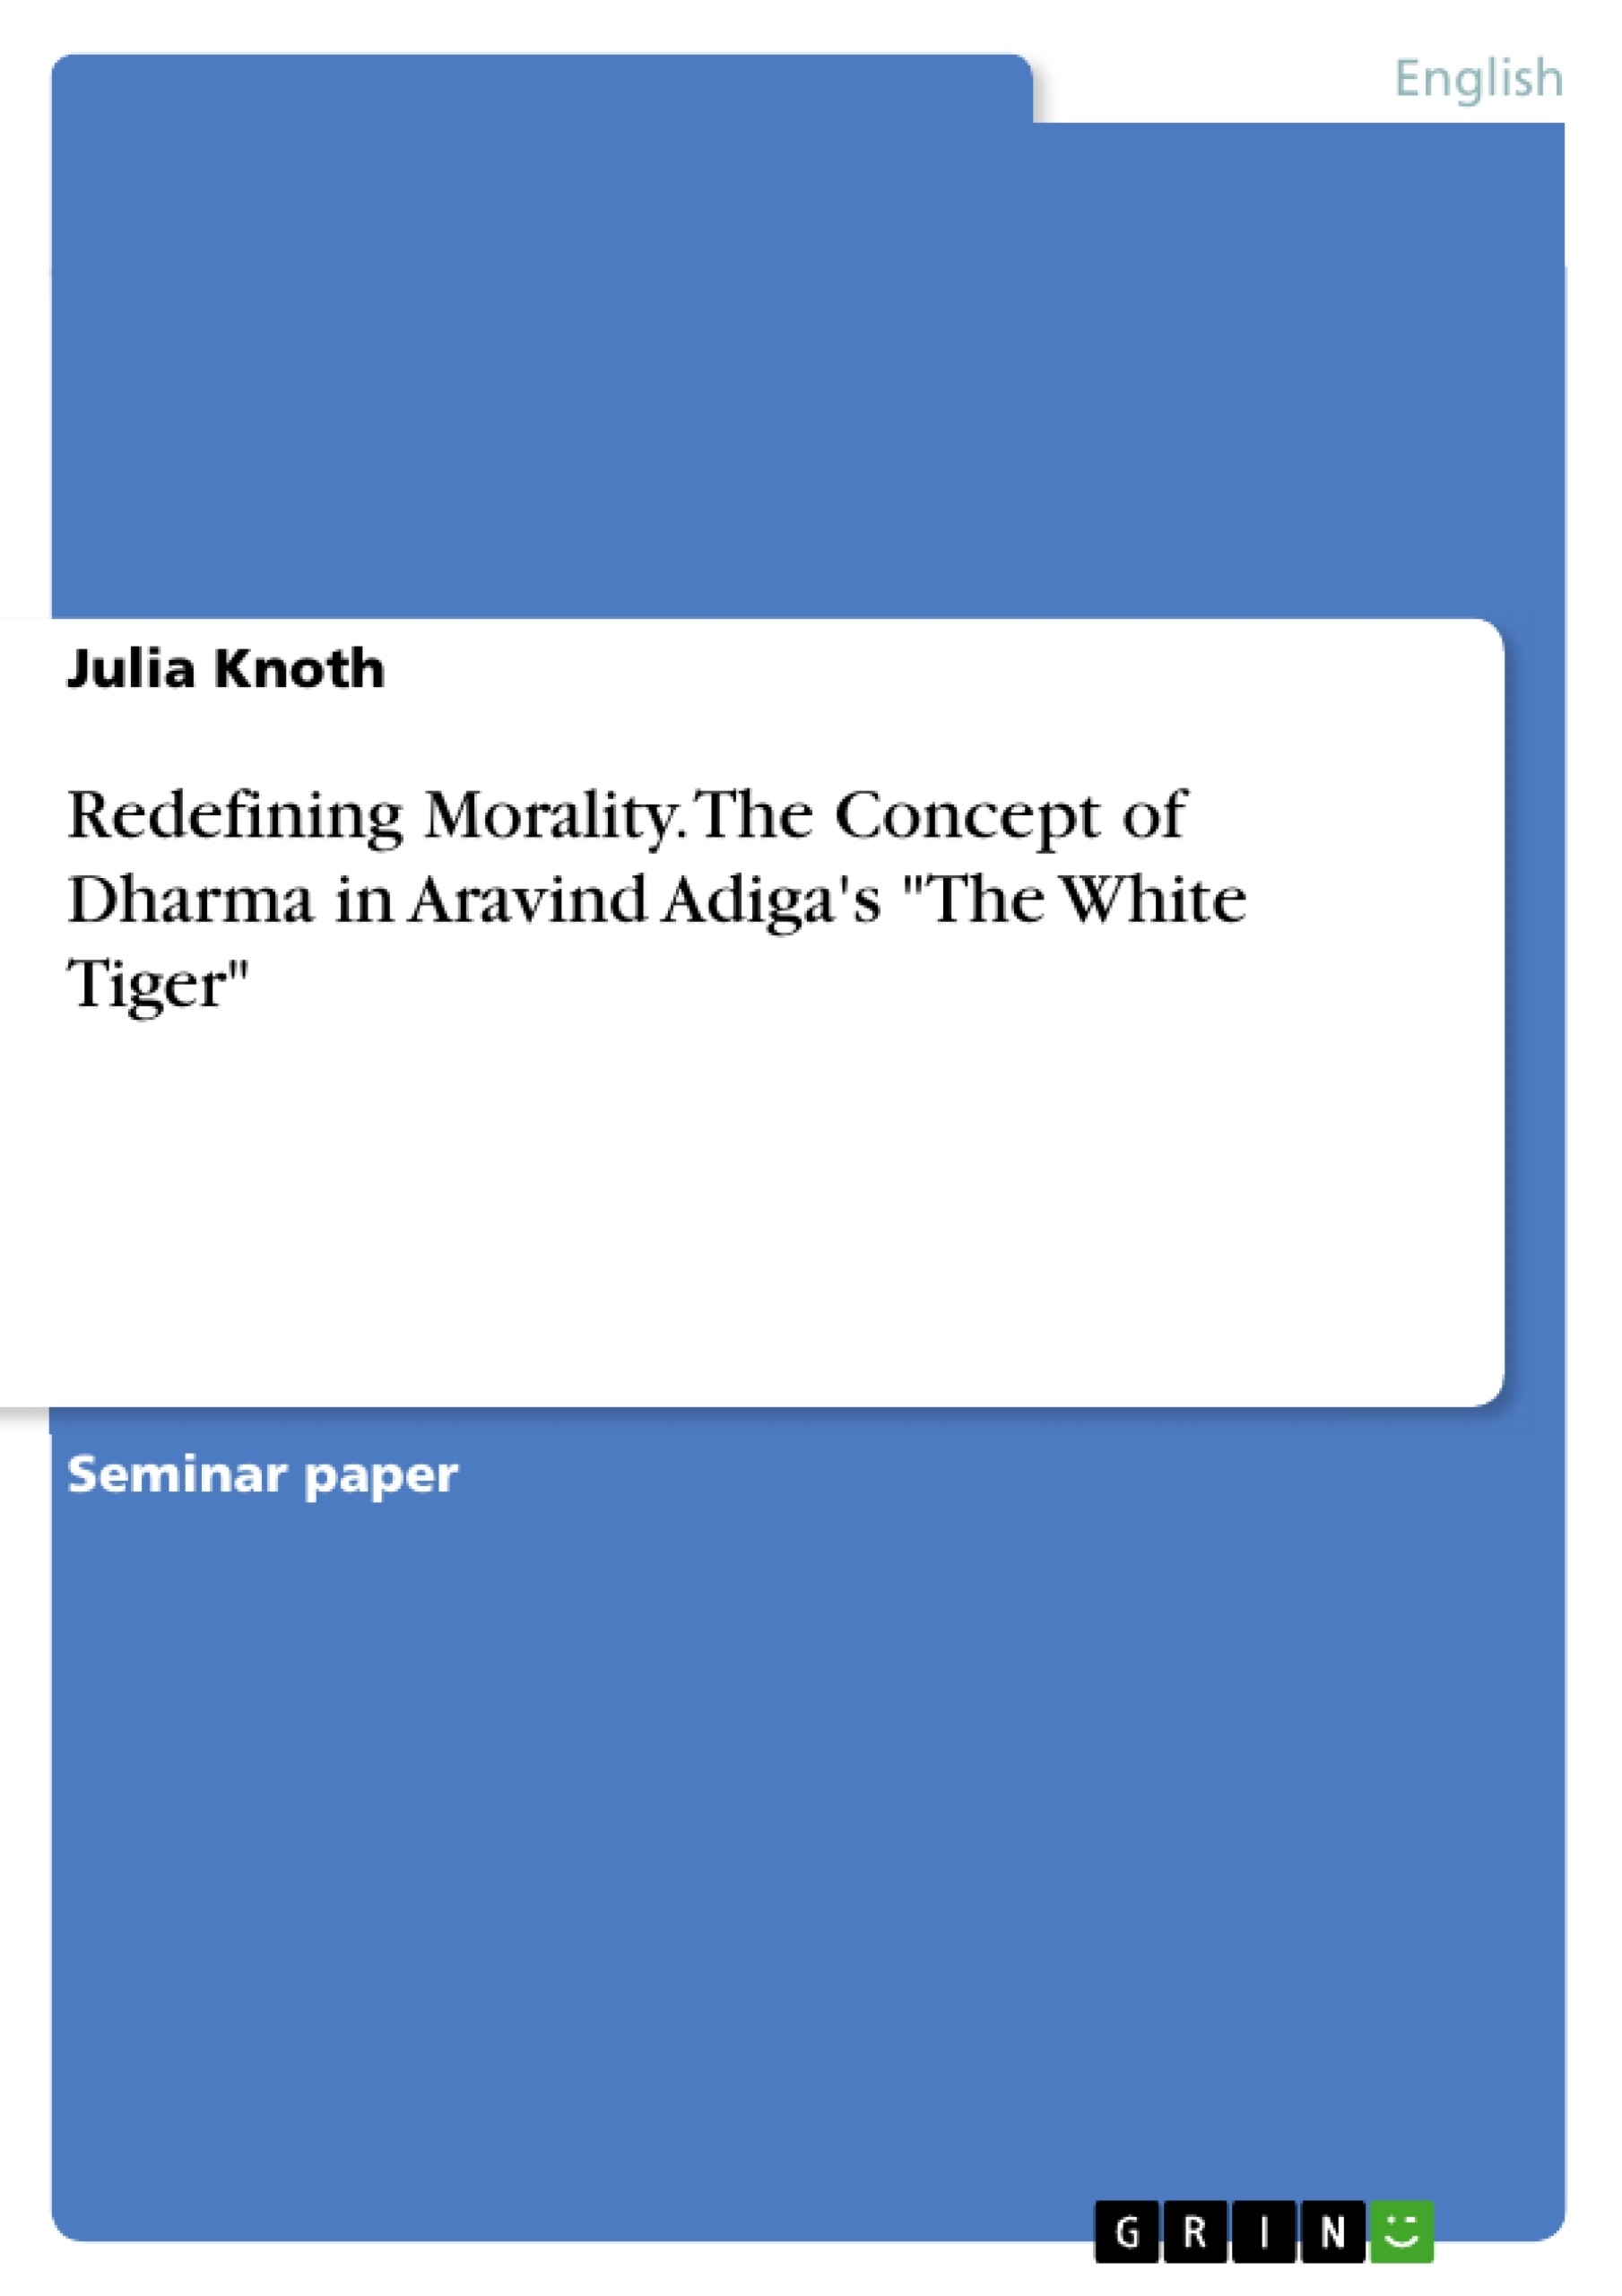 Title: Redefining Morality. The Concept of Dharma in Aravind Adiga's "The White Tiger"